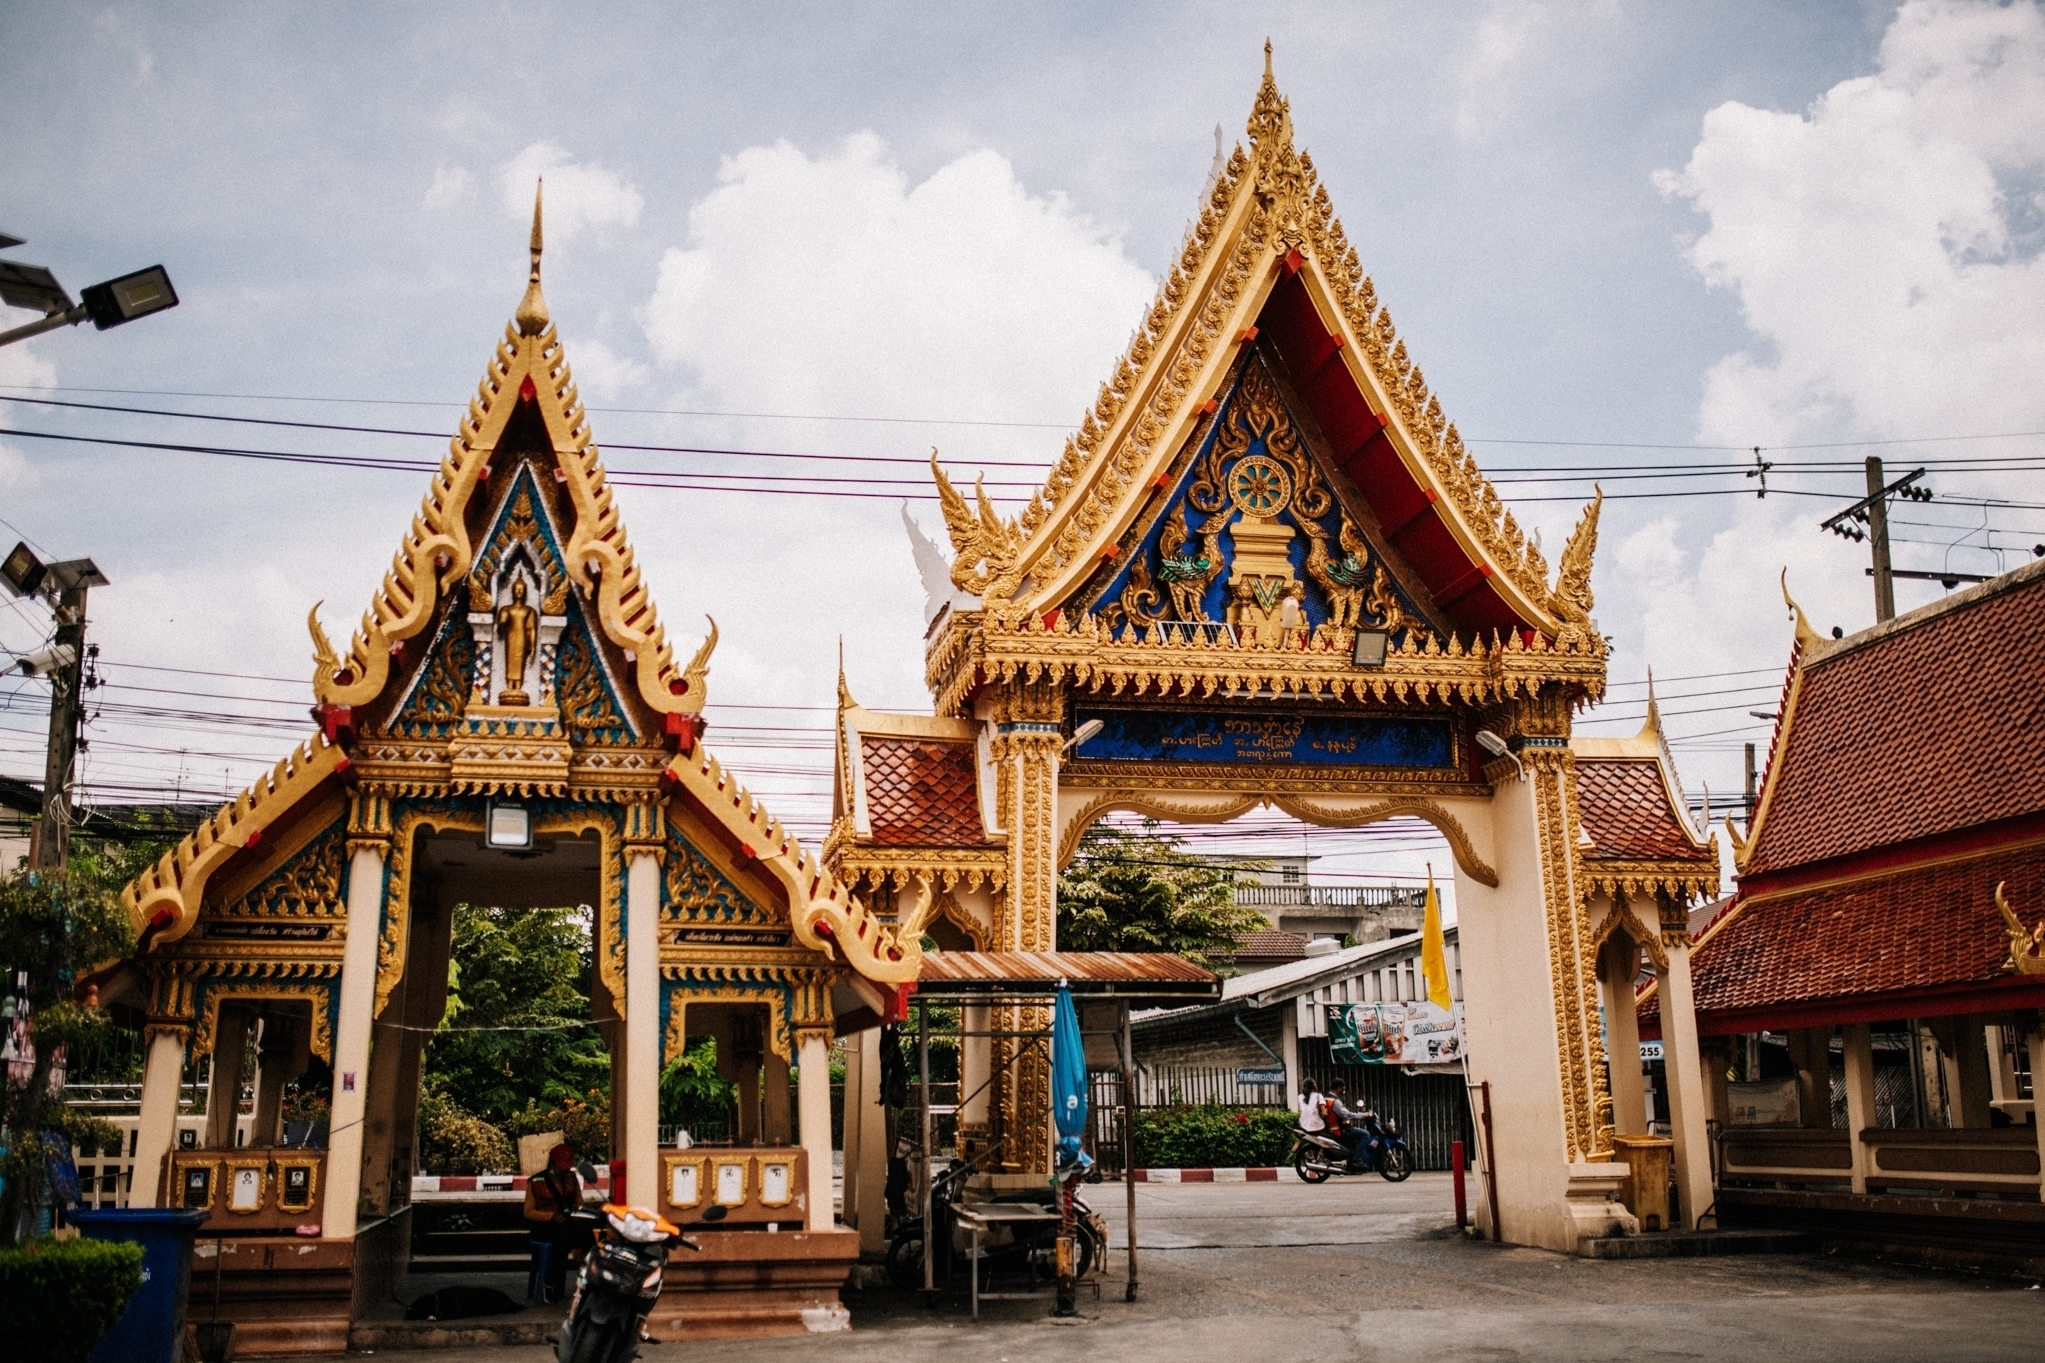 Thailand | being abroad for work